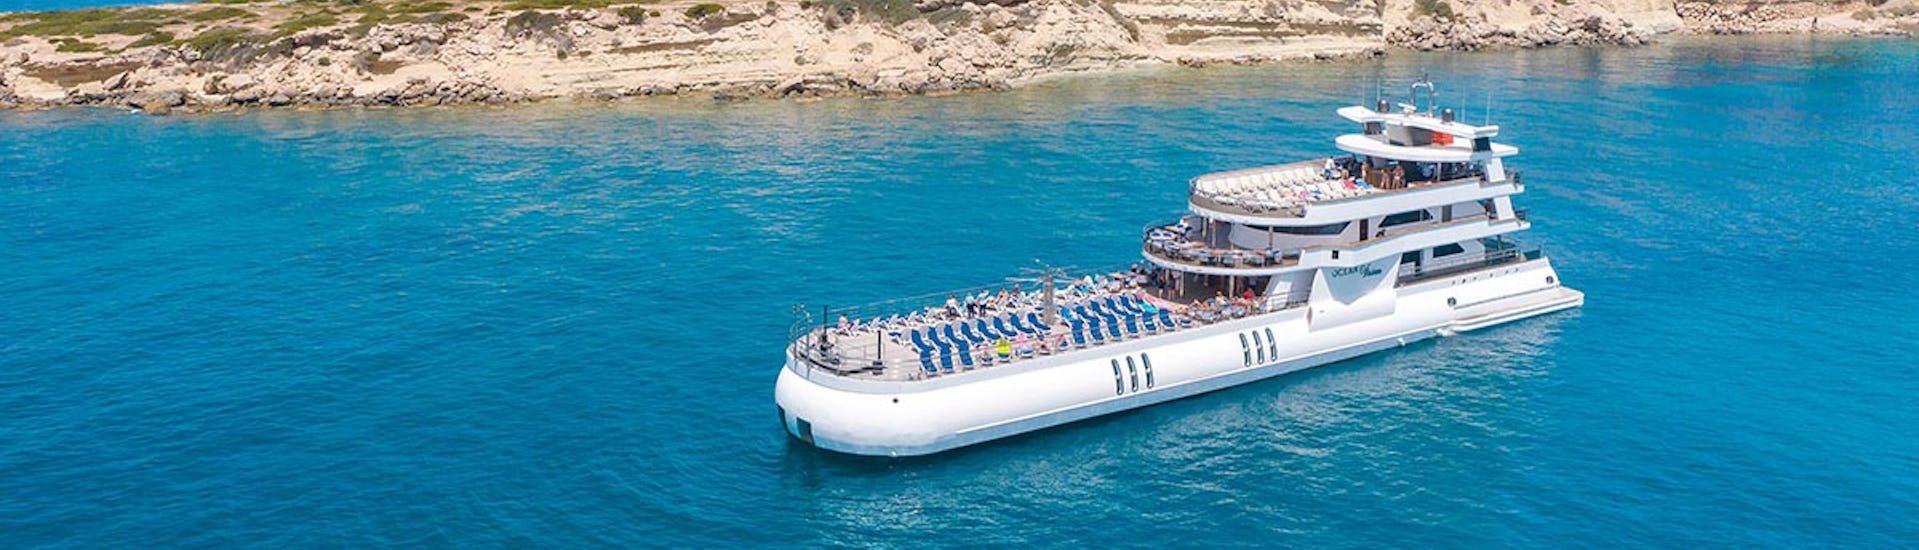 All-inclusive Boat Trip to the Coral Bay from Paphos & Latchi with Pick-up.